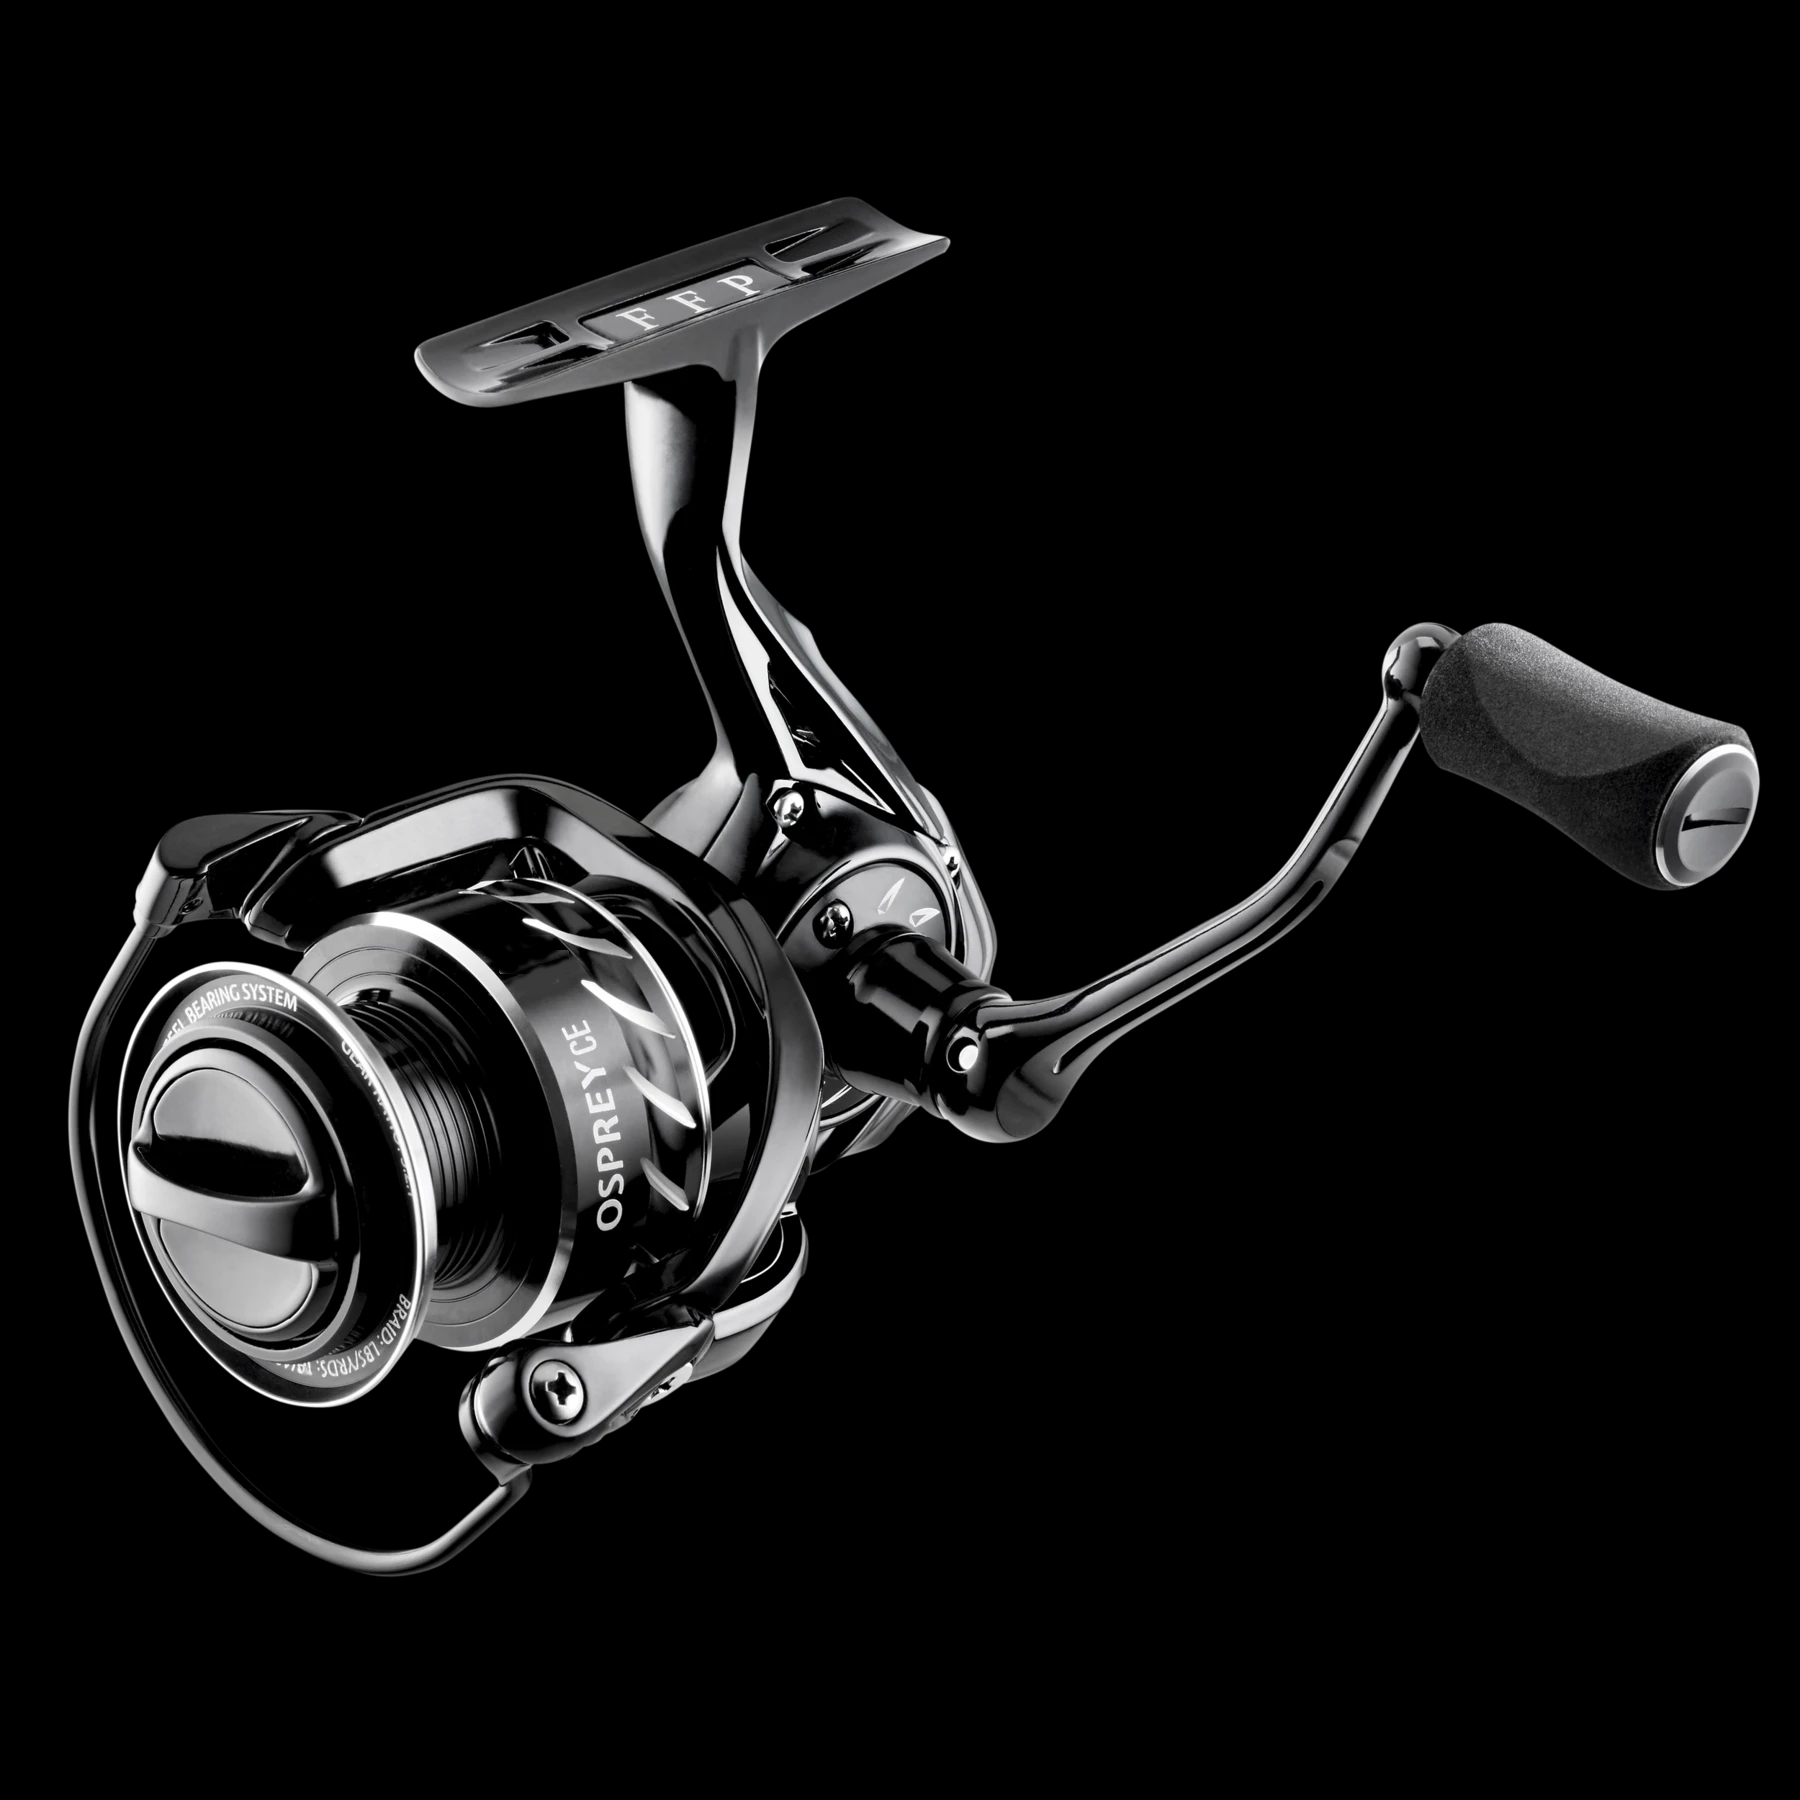 Florida Fishing Products Osprey CE Spinning Reel 1000 - Andy